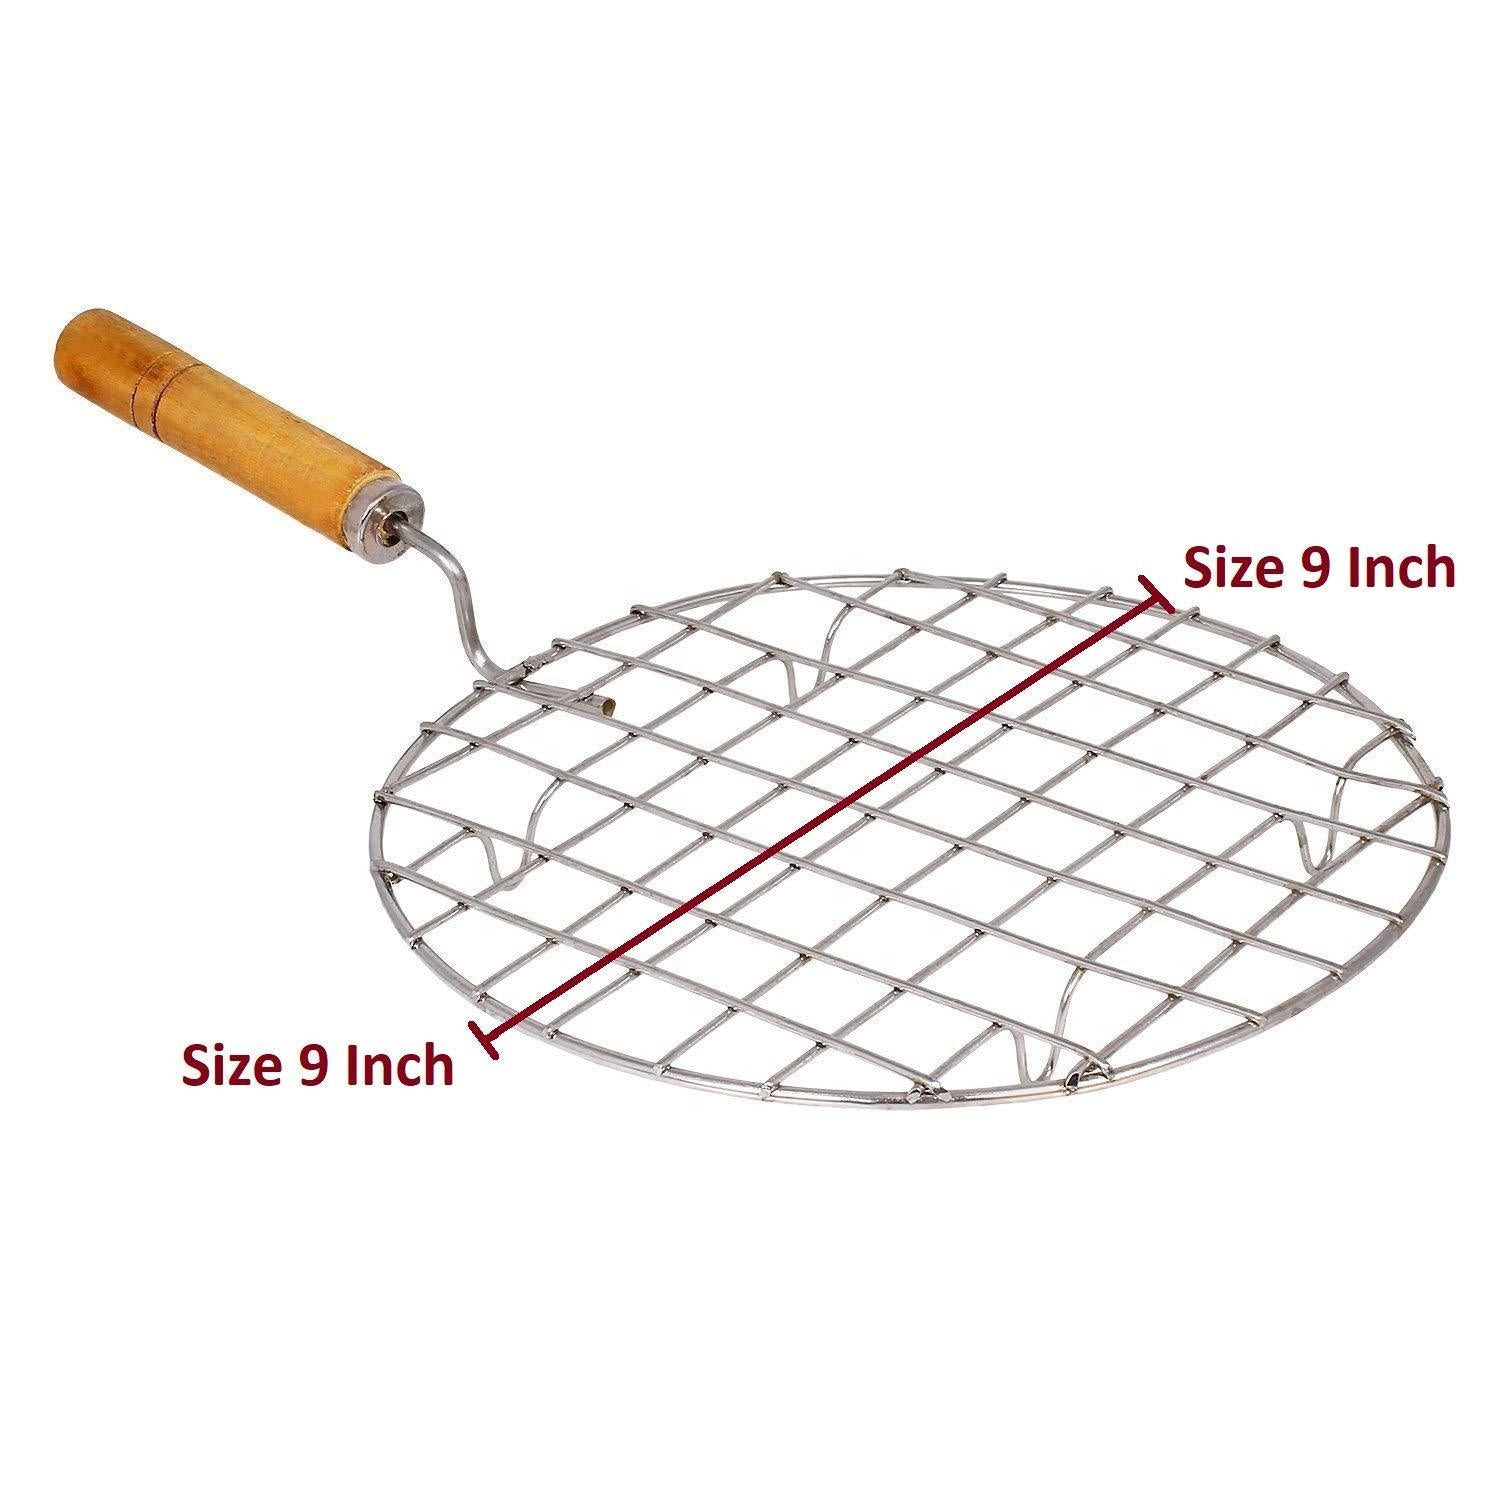 2085 Kitchen Round Stainless Steel Roaster Papad Jali, Barbecue Grill with Wooden Handle - SkyShopy